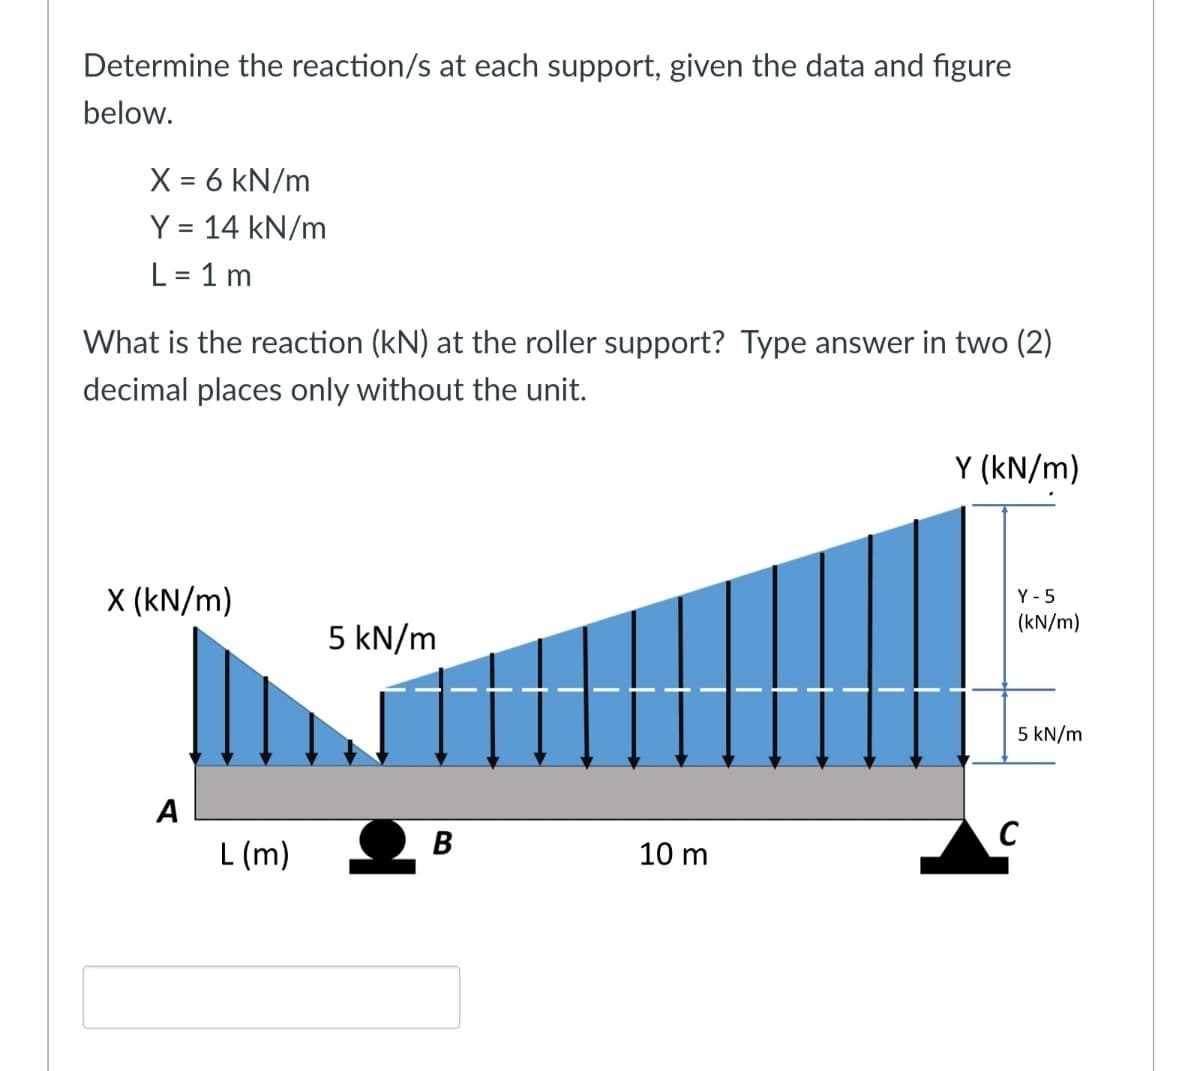 Determine the reaction/s at each support, given the data and figure
below.
X = 6 kN/m
Y = 14 kN/m
L = 1 m
What is the reaction (kN) at the roller support? Type answer in two (2)
decimal places only without the unit.
Y (kN/m)
X (kN/m)
Y - 5
(kN/m)
5 kN/m
5 kN/m
A
В
L (m)
10 m
